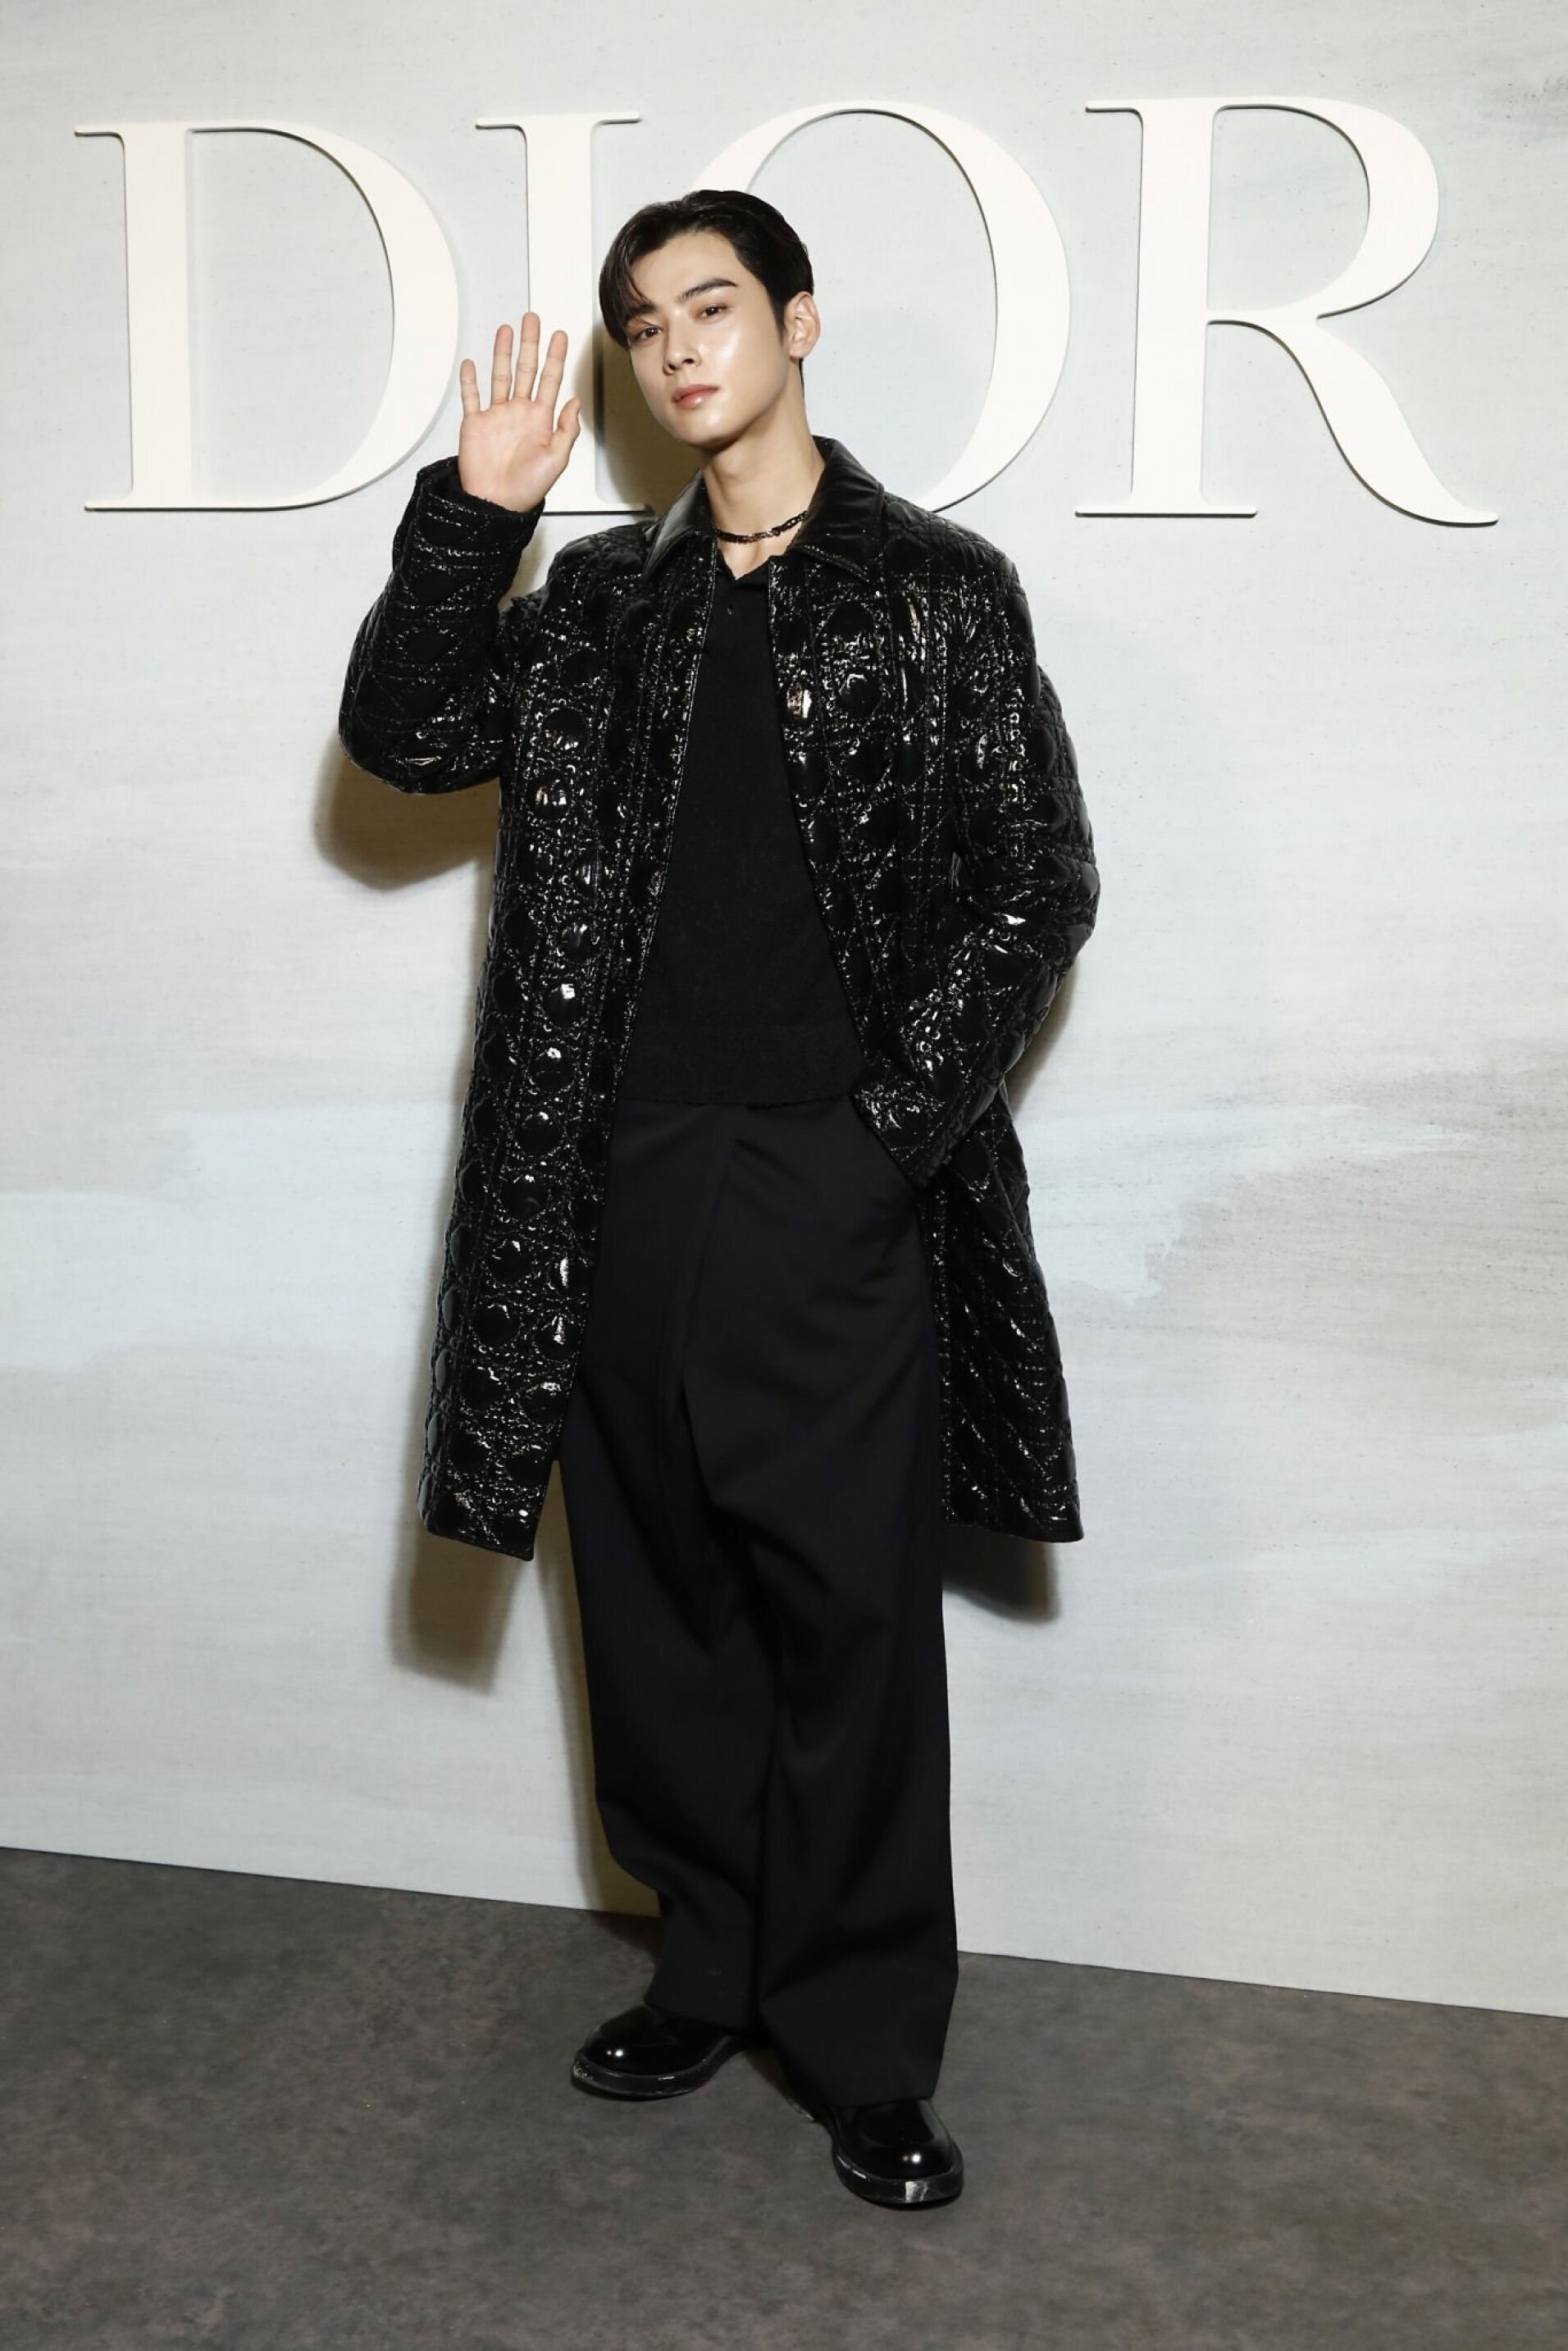 Cha Eun Woo at Dior's After-Party. Let's Clear this Up. in 2023